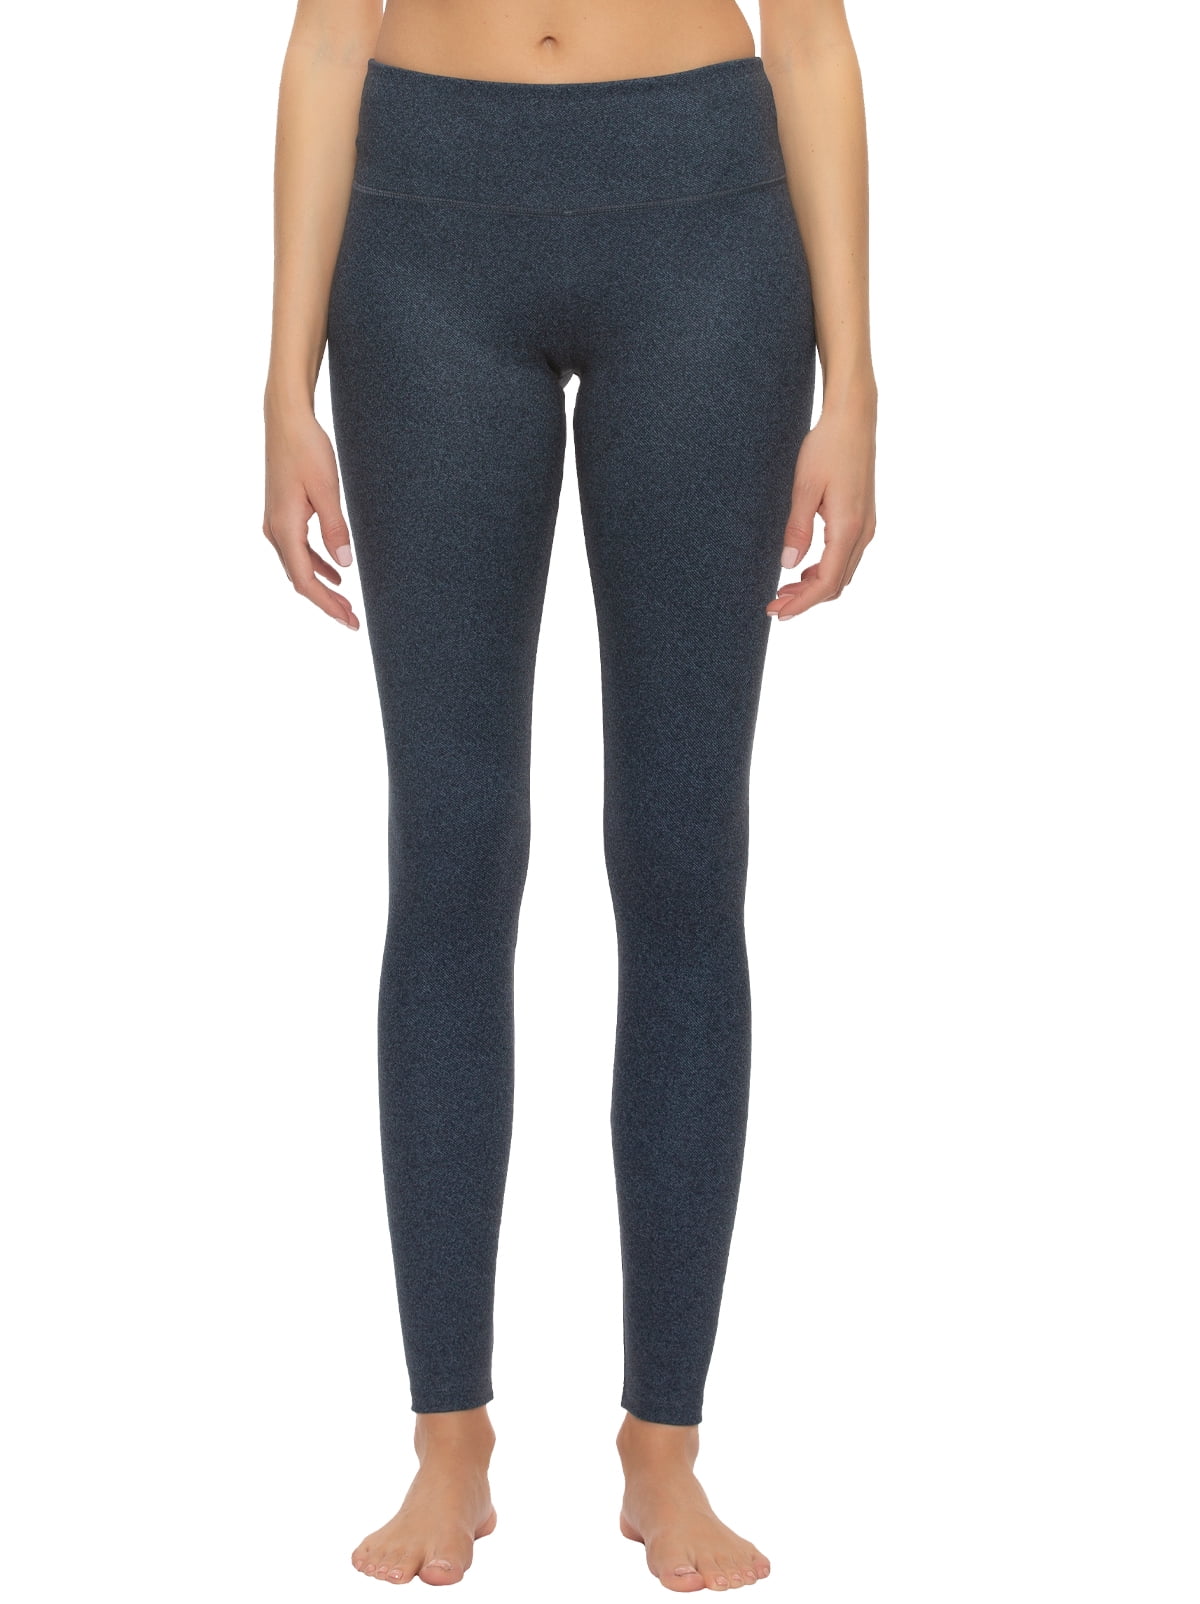 Felina 2-pack sueded leggings are $4 off through 1/24! 🙌🏼 These